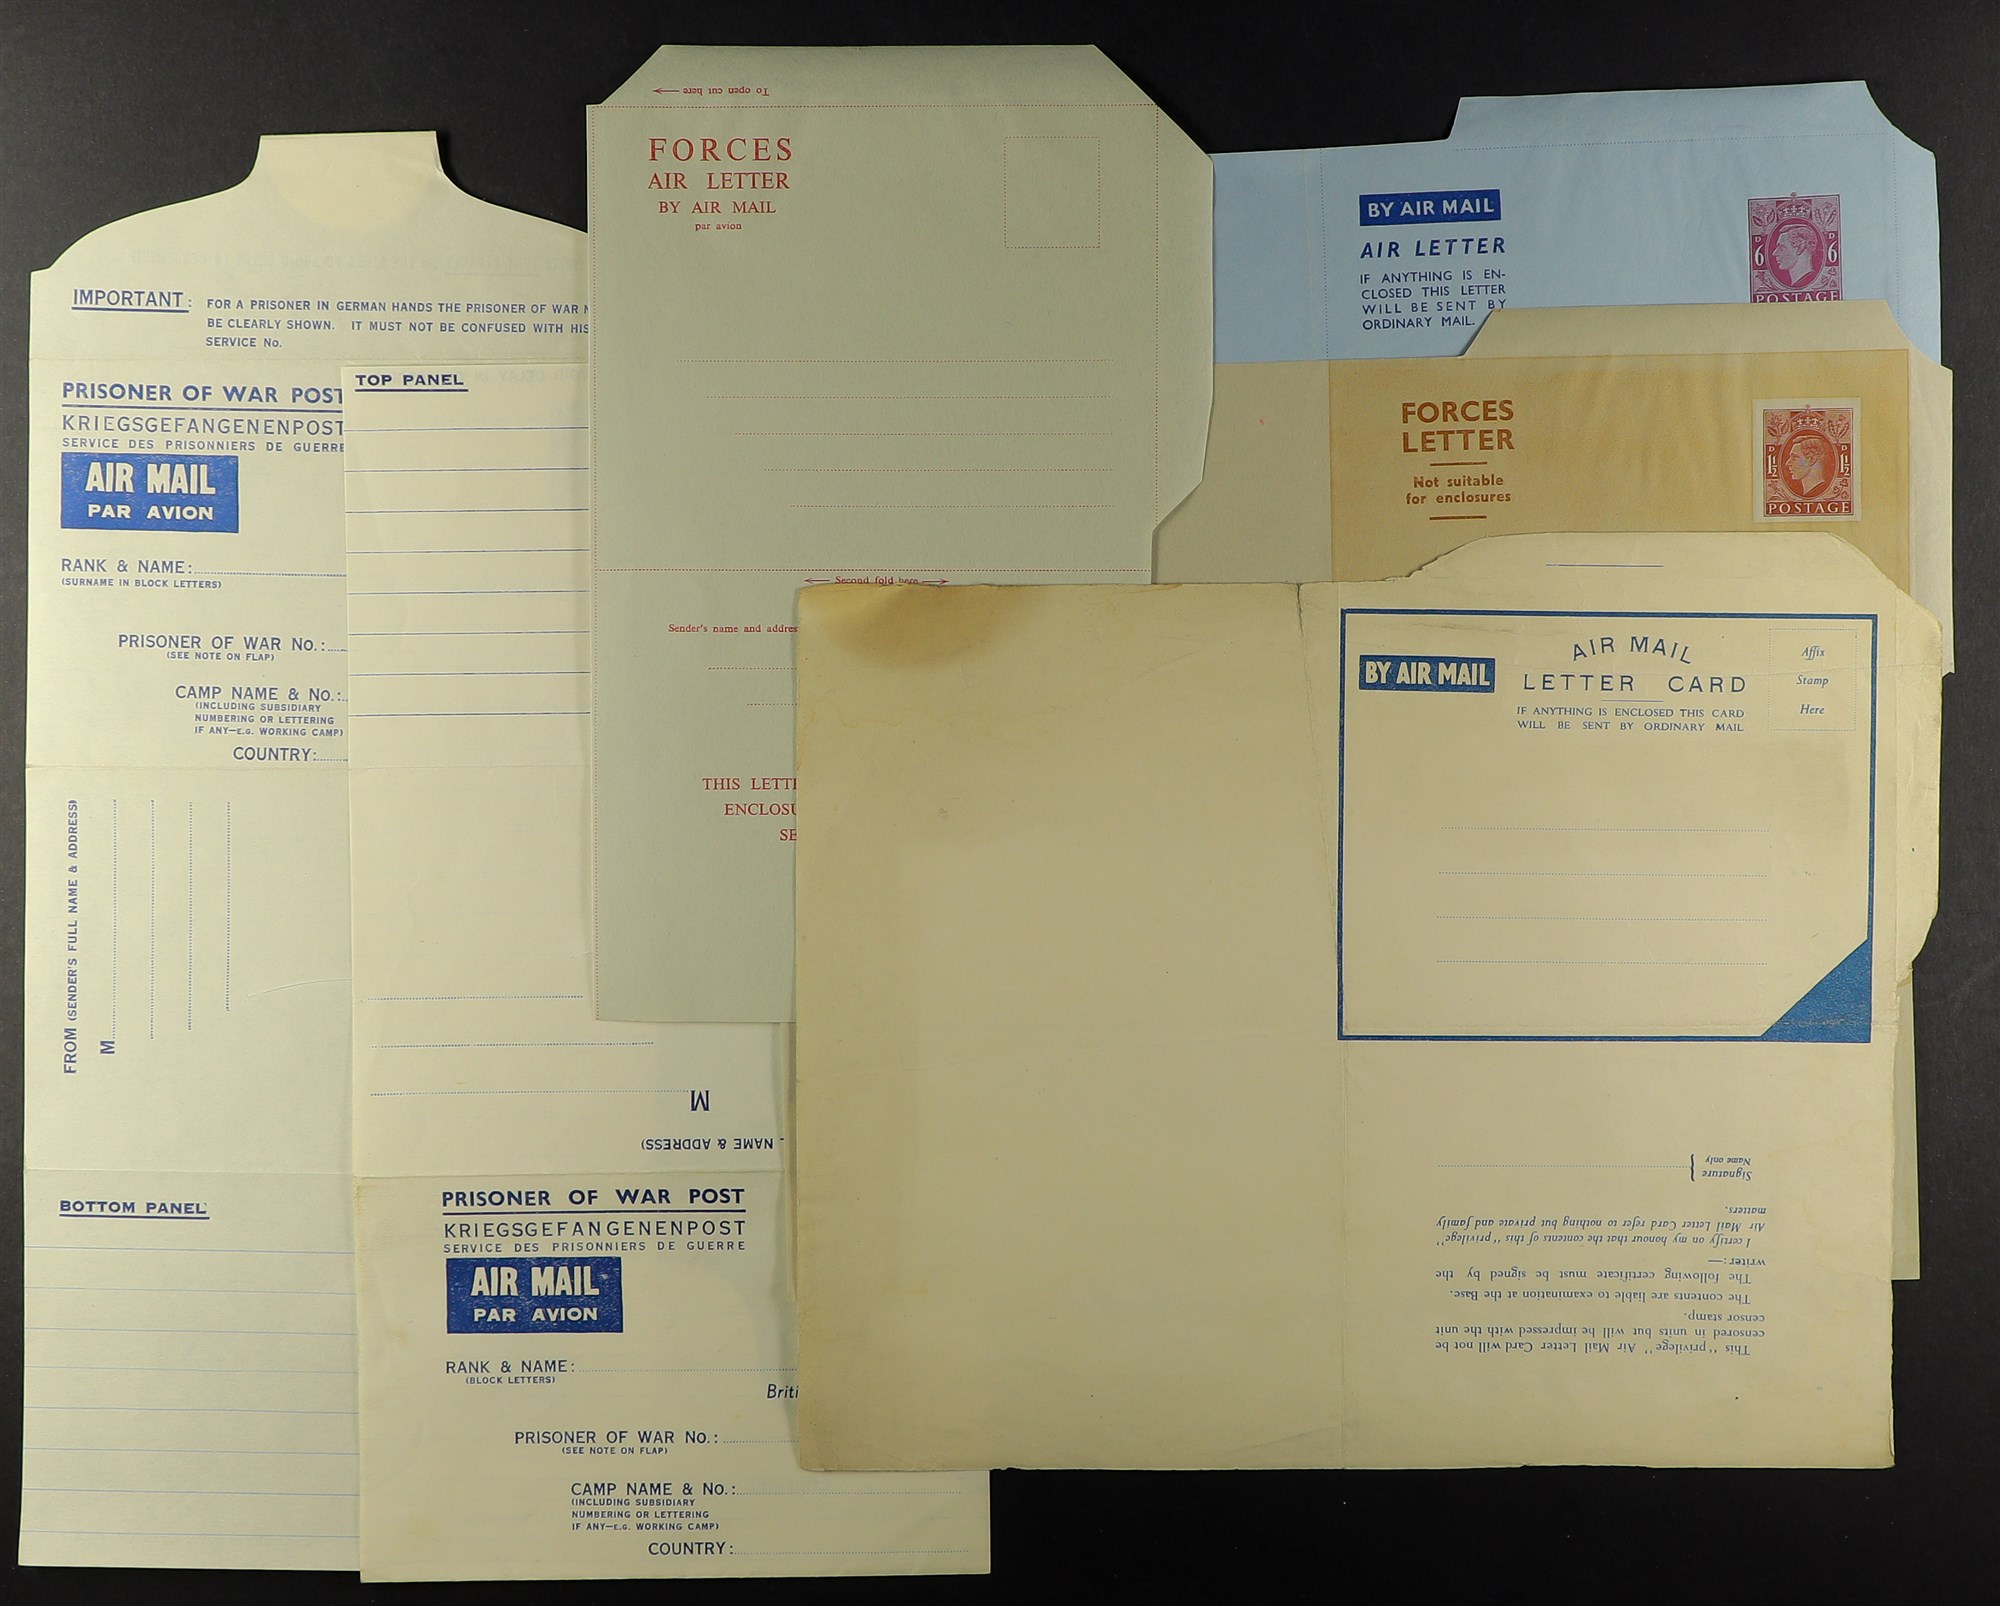 GB. COVERS & POSTAL HISTORY AEROGRAMME COLLECTION 1940s - 1980s. A duplicated lot with approximately